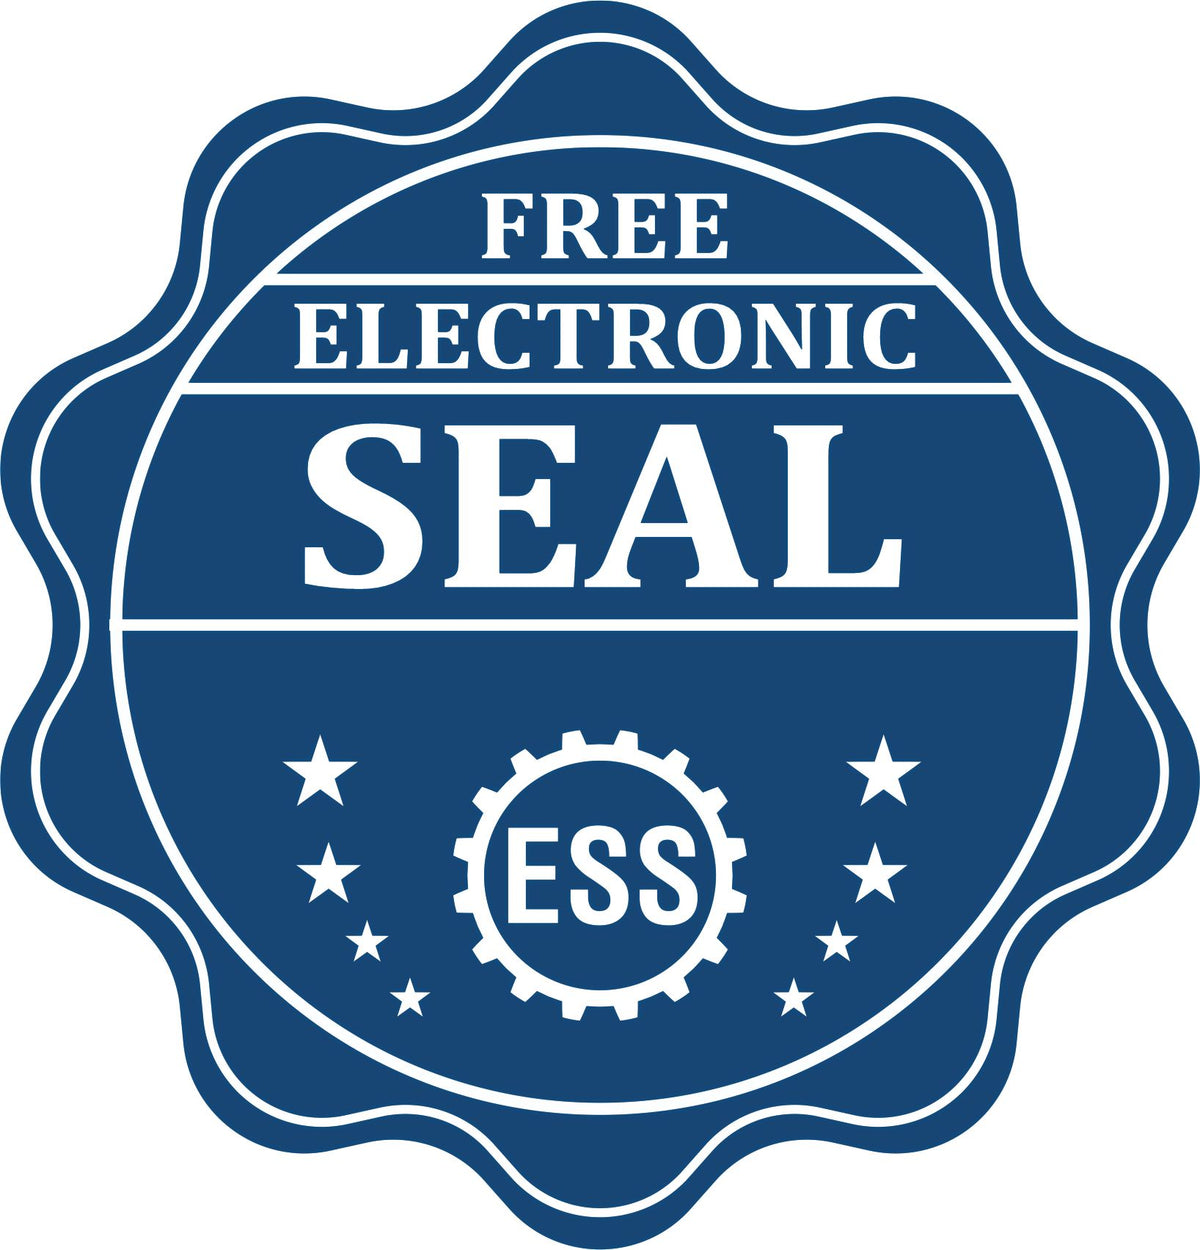 A badge showing a free electronic seal for the Super Slim Louisiana Notary Public Stamp with stars and the ESS gear on the emblem.